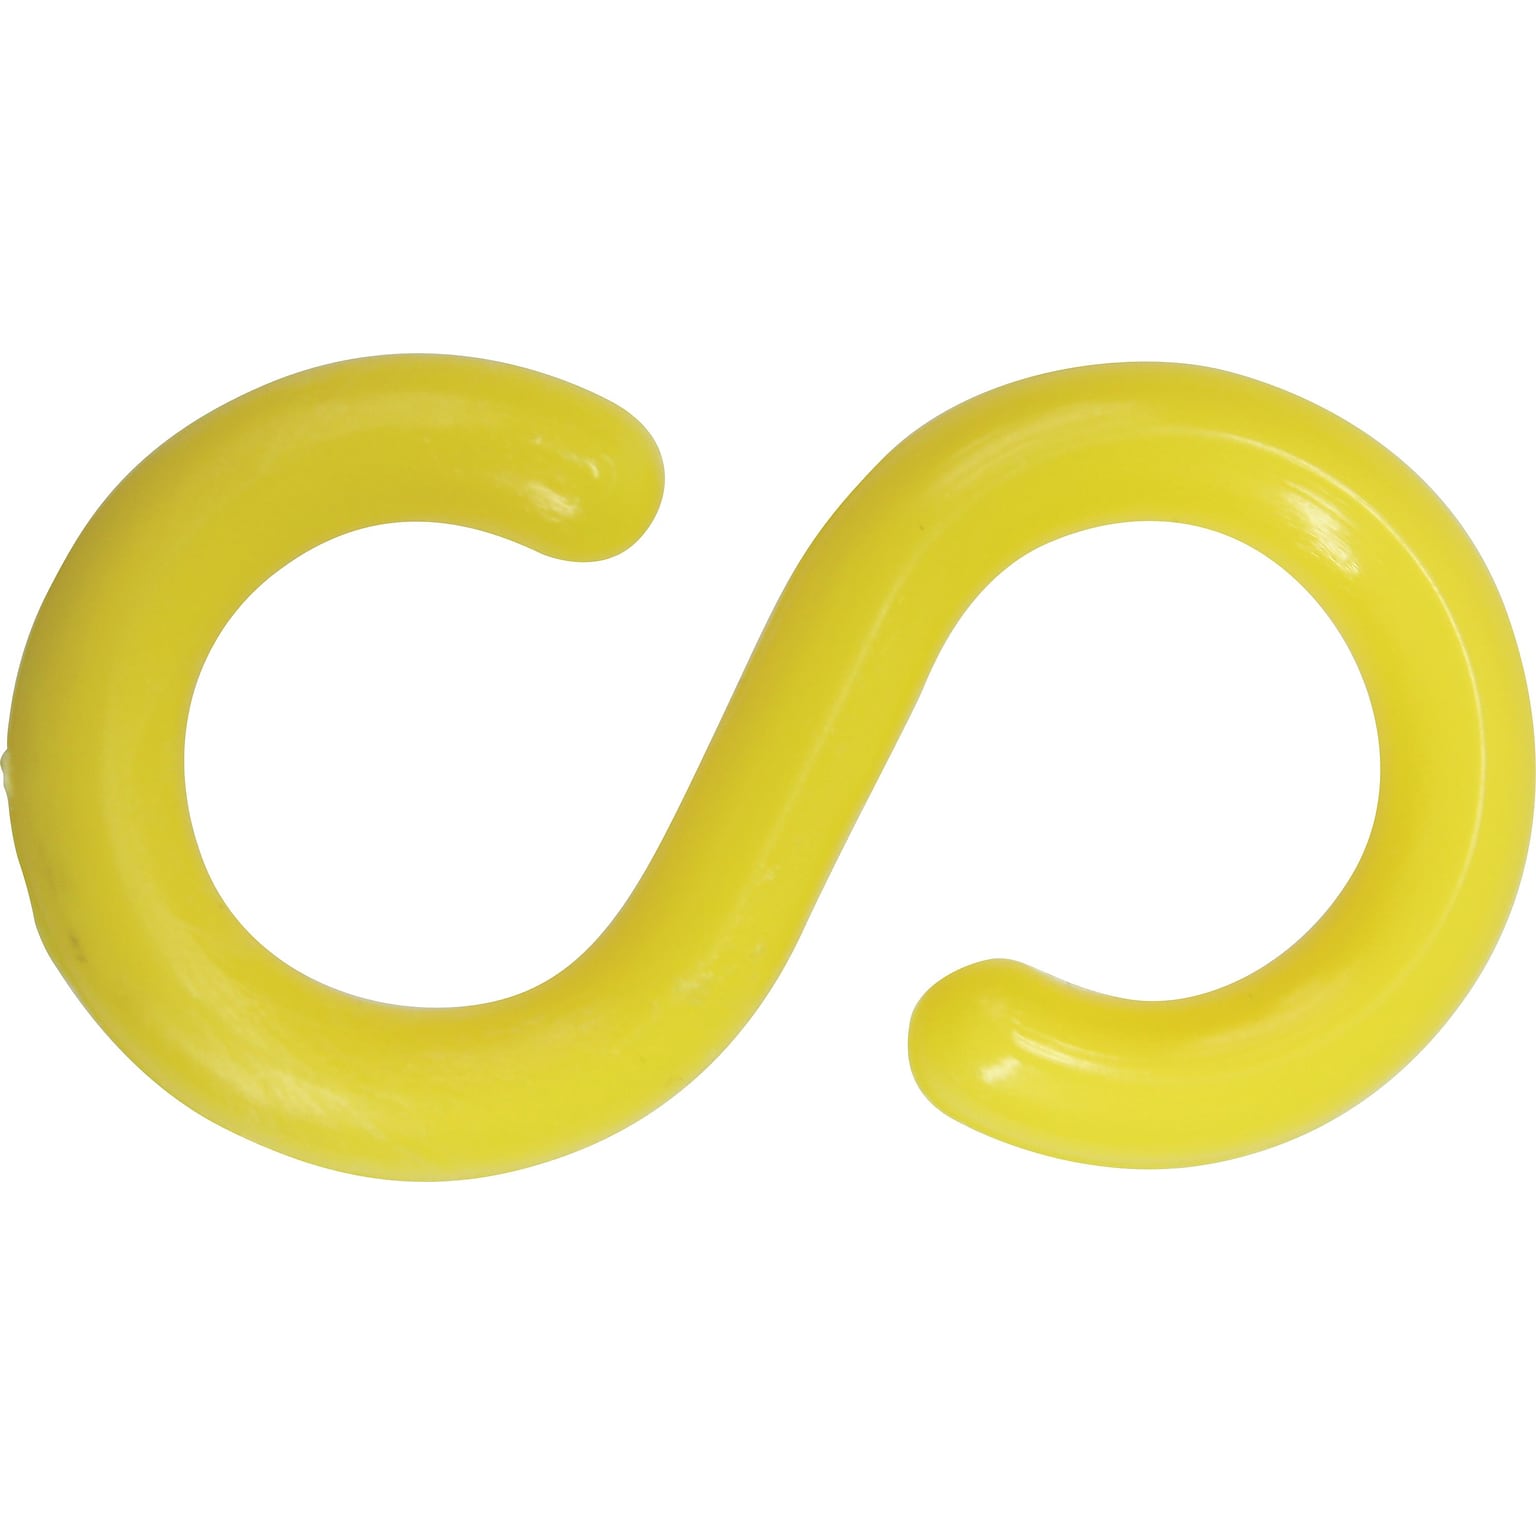 ACCUFORM SIGNS® S-Hook, Accessory For Linking & Unlinking Separate Lengths of Plastic Chain, Yellow